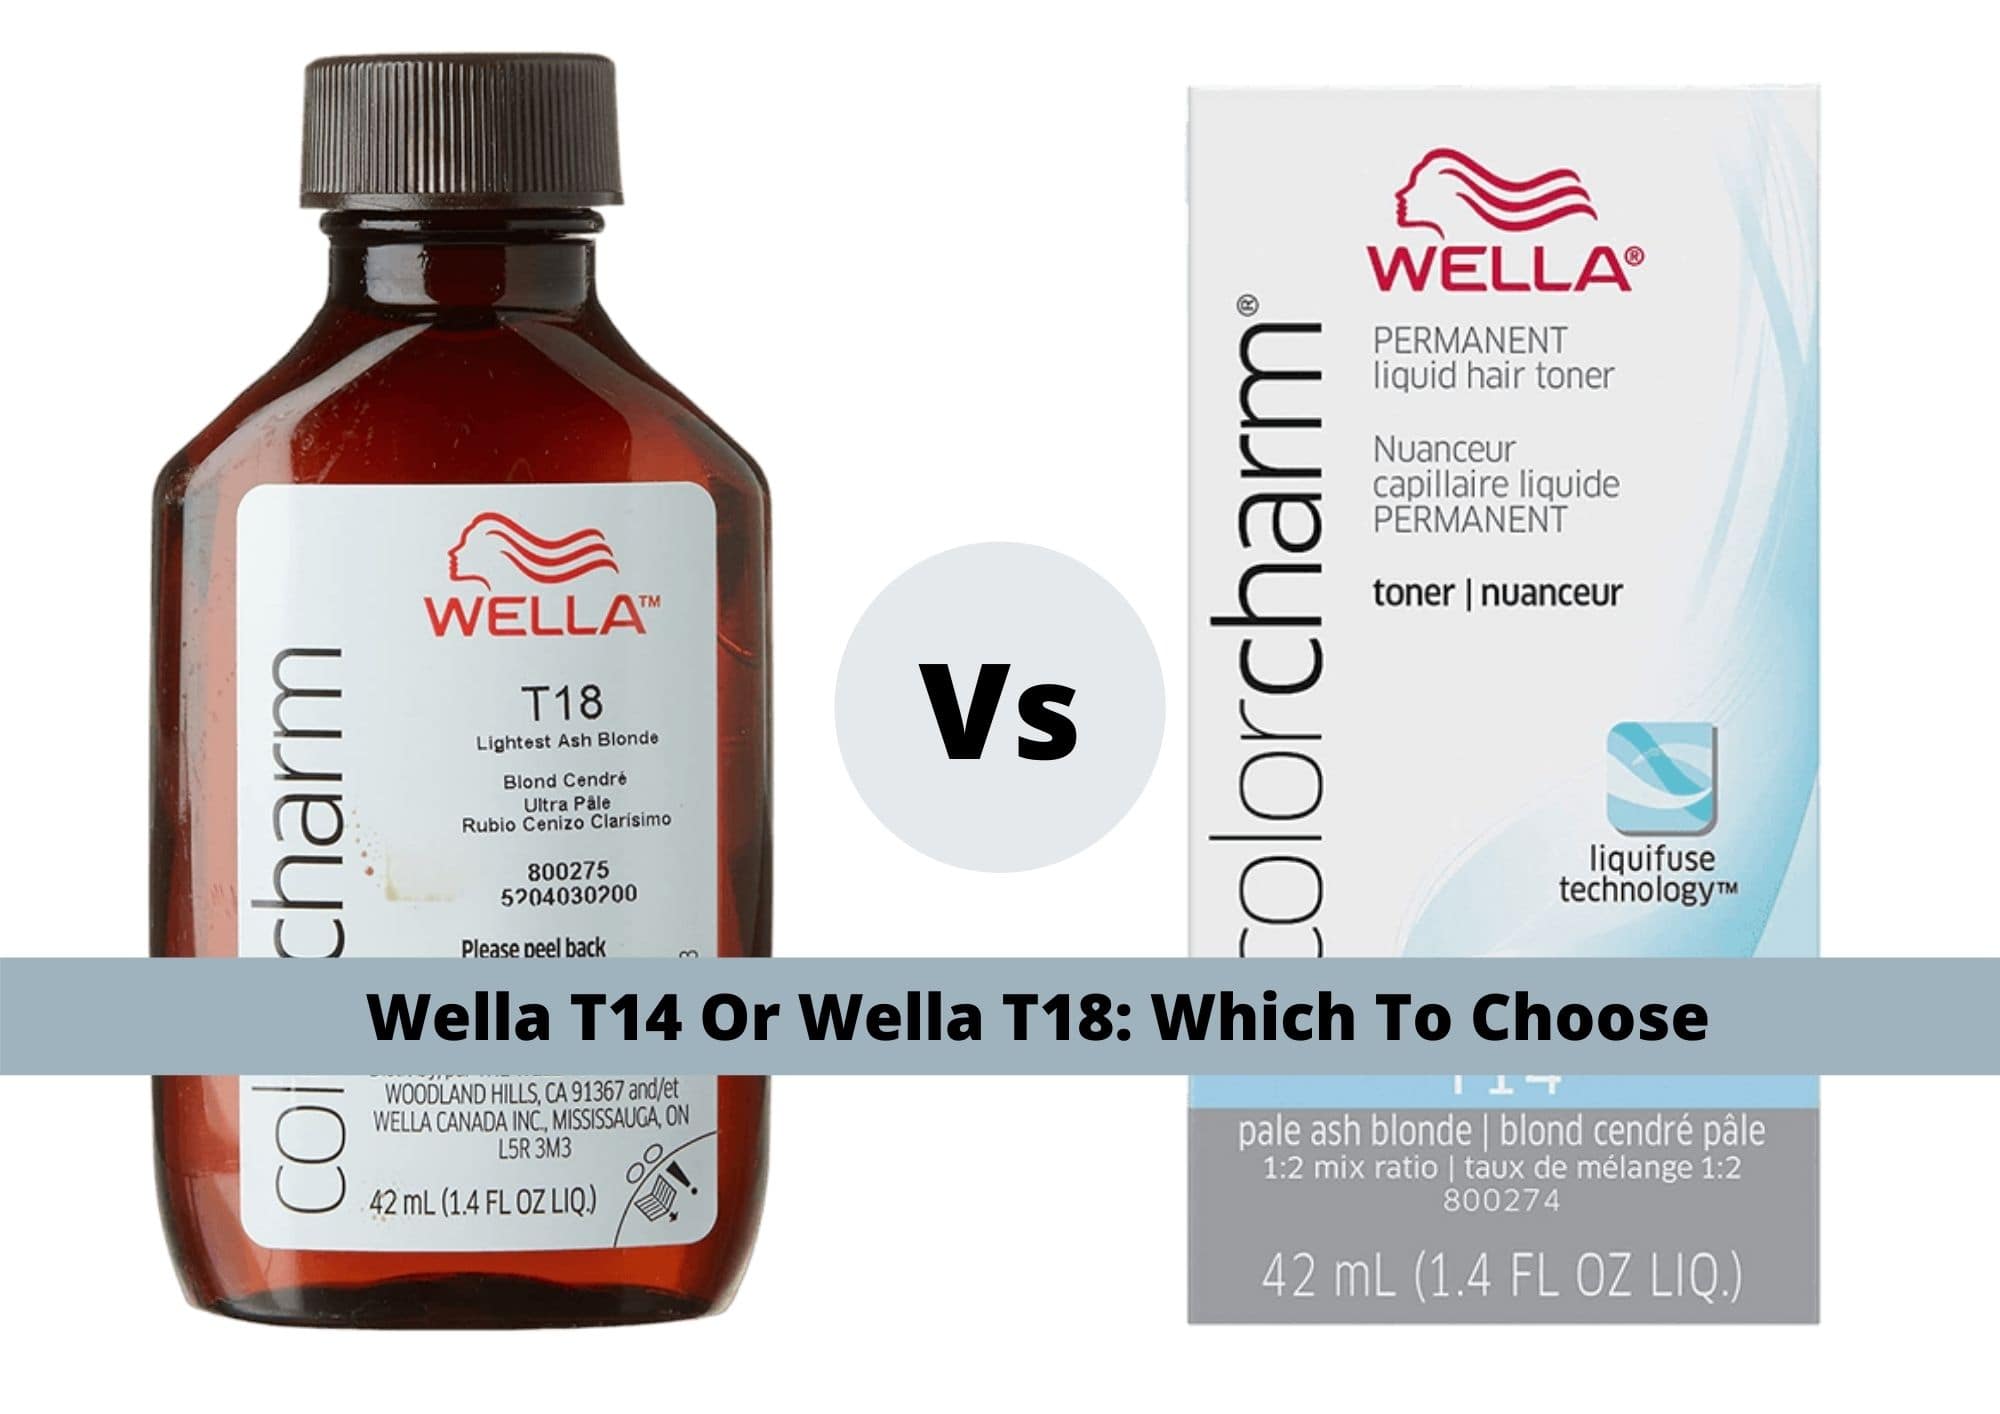 Wella T14 Vs T18 | Key Differences Between The Toners, Results, How To Use  - Hair Everyday Review